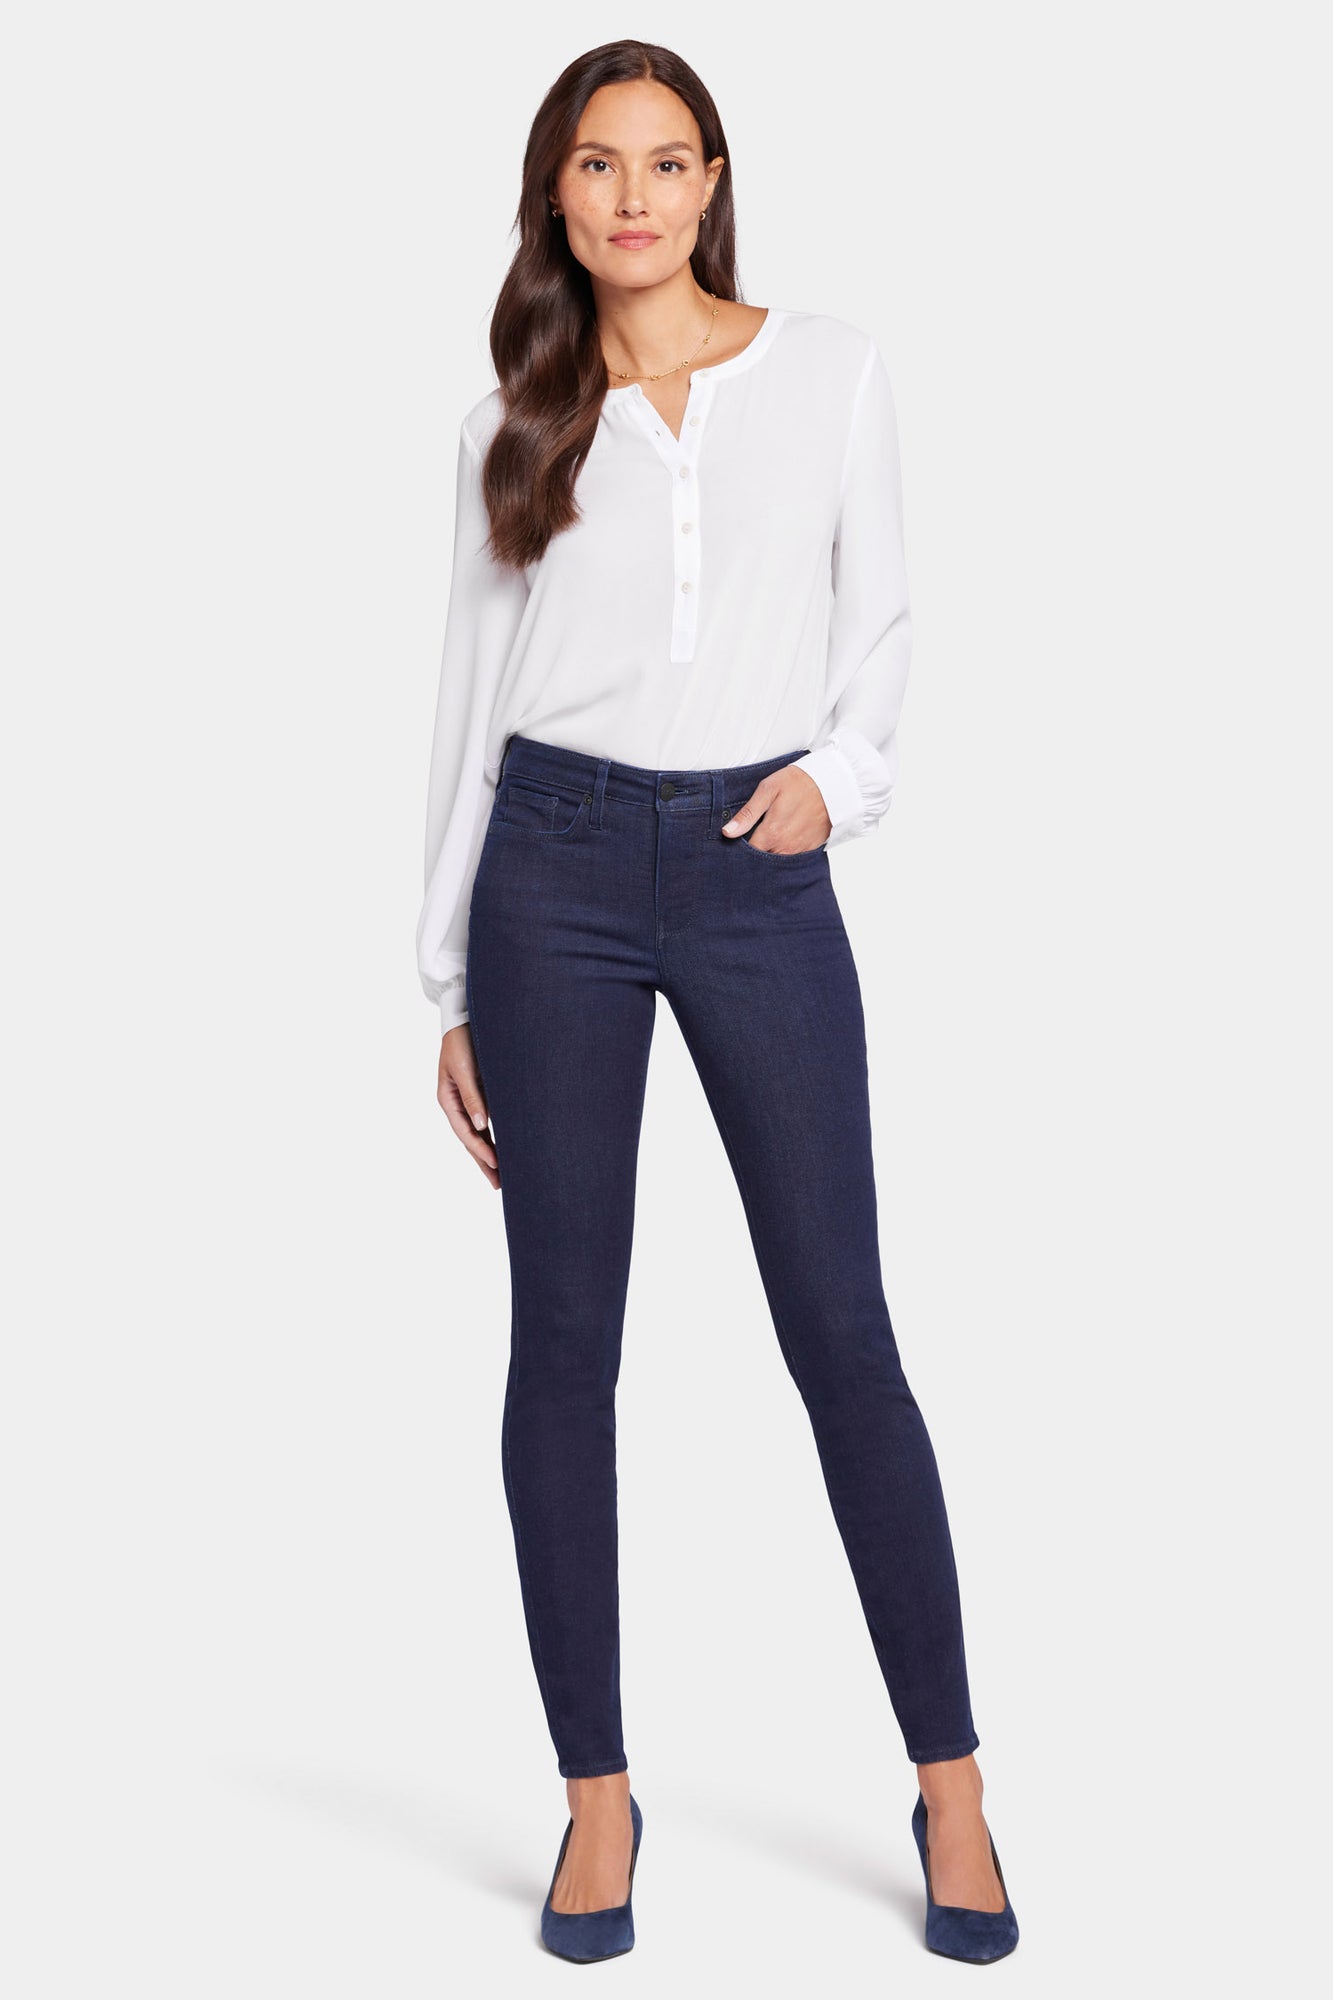 Tall Jeans for Women